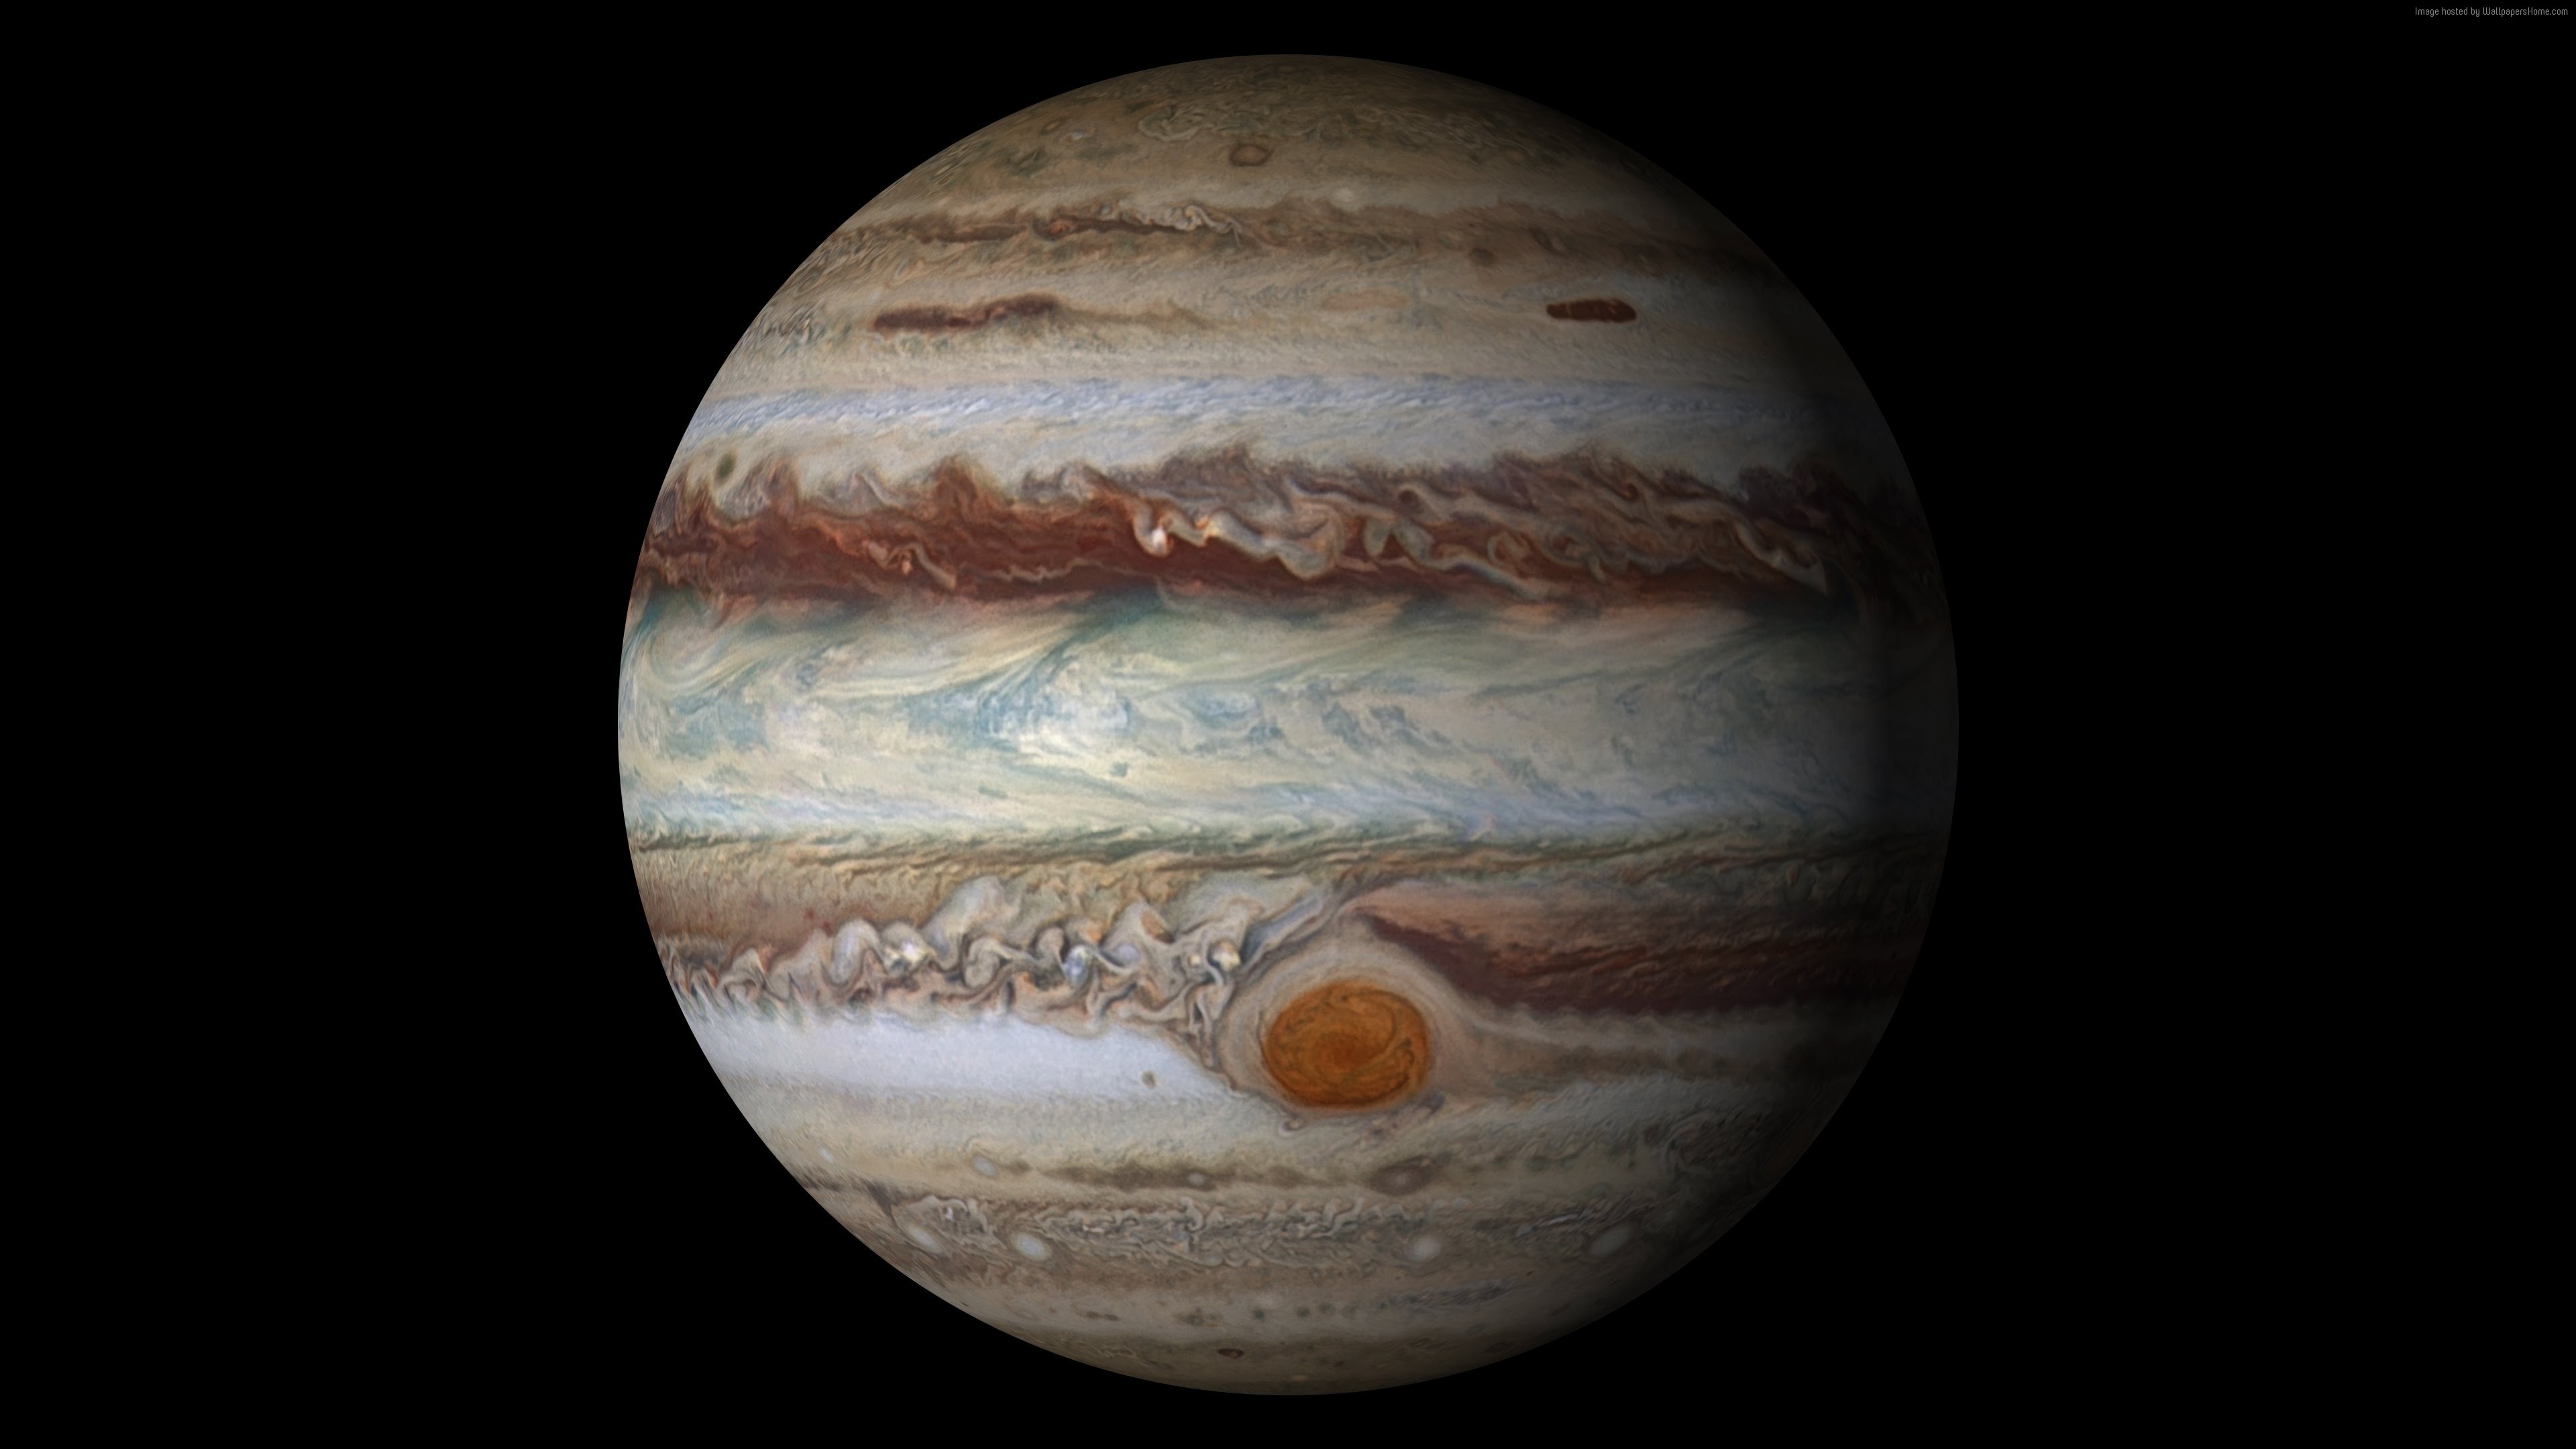 Hd Picture Of Jupiter - HD Wallpaper 